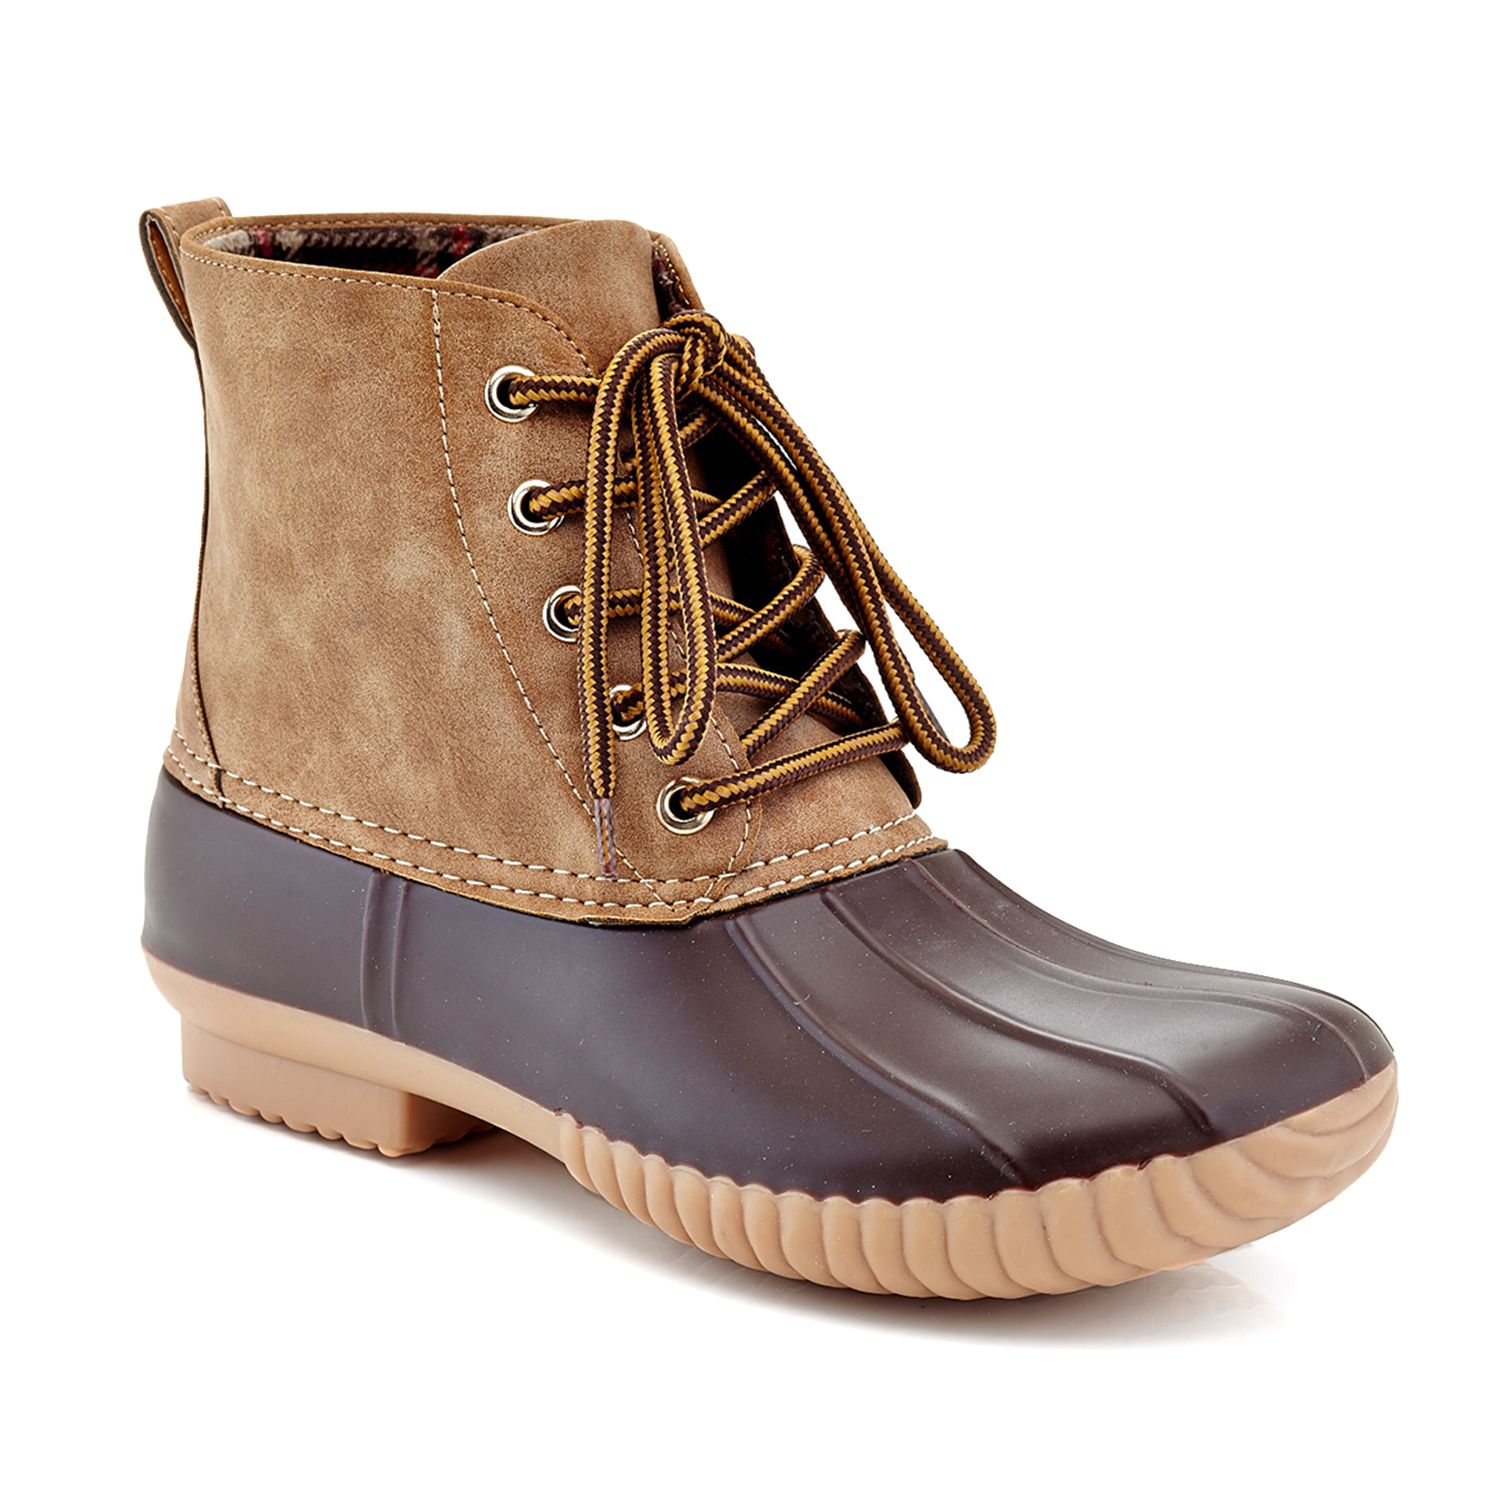 Image for Henry Ferrera Mission 200 Women's Water Resistant Duck Winter Boots at Kohl's.